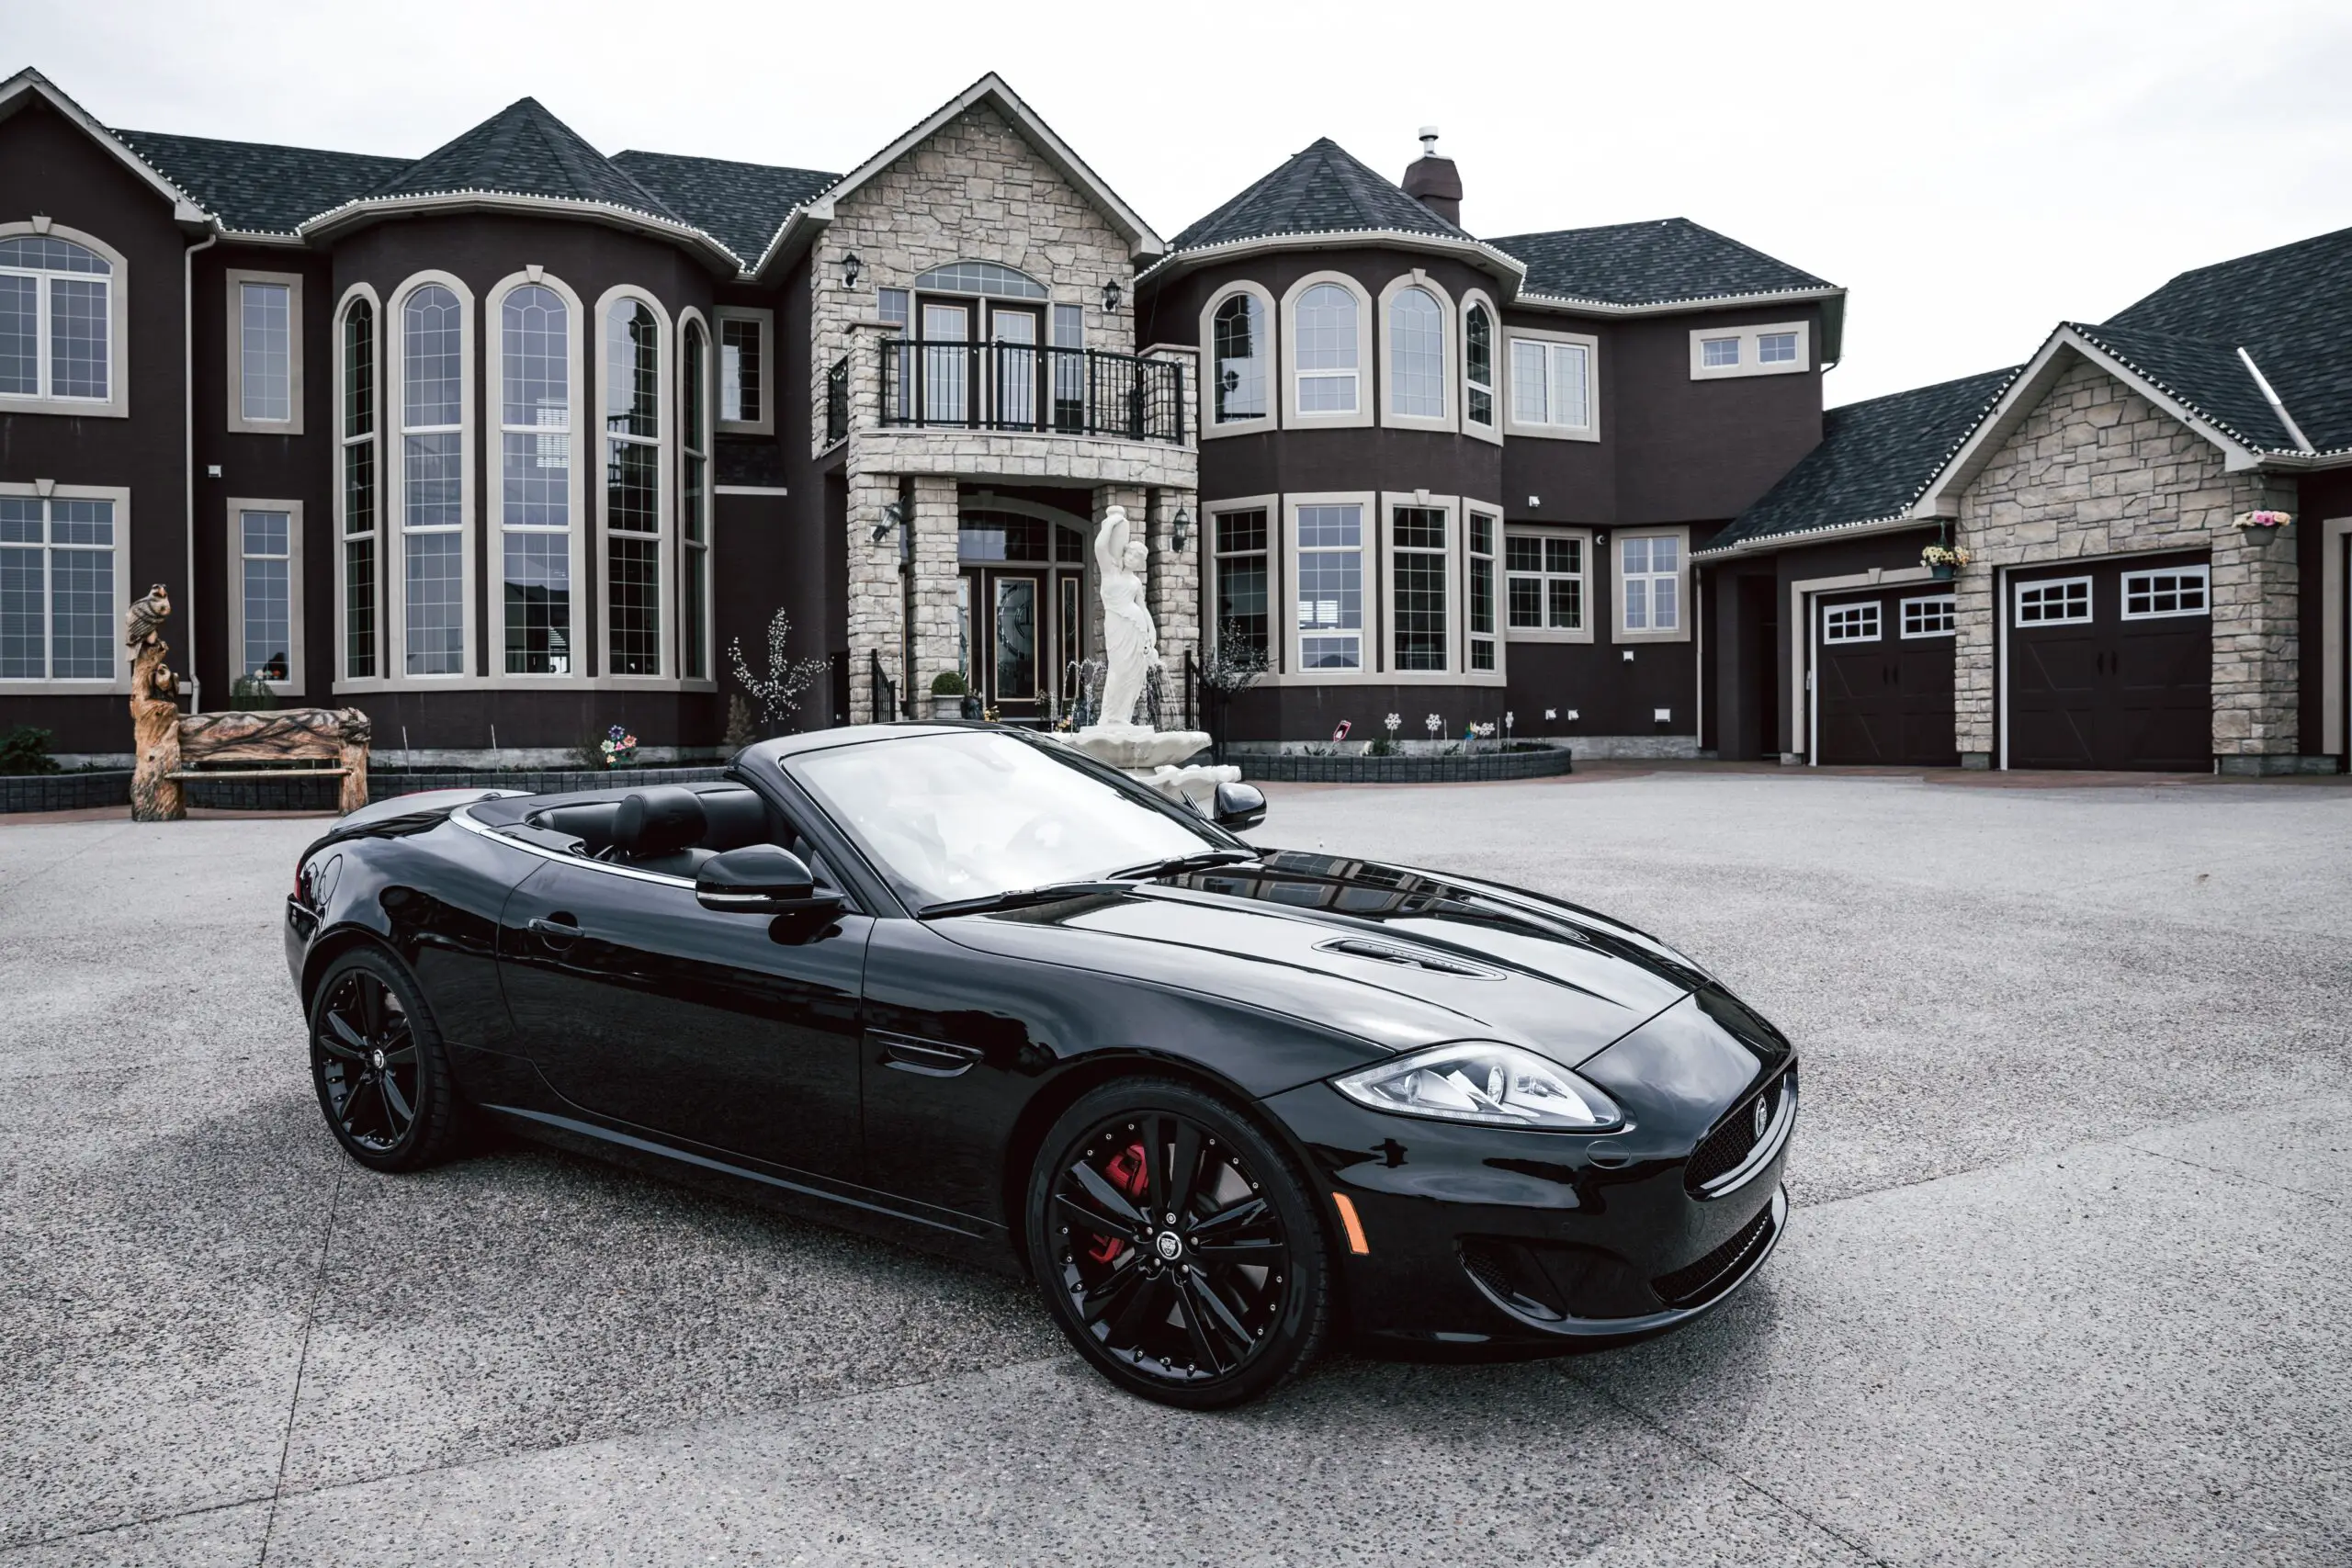 Expensive House With Car